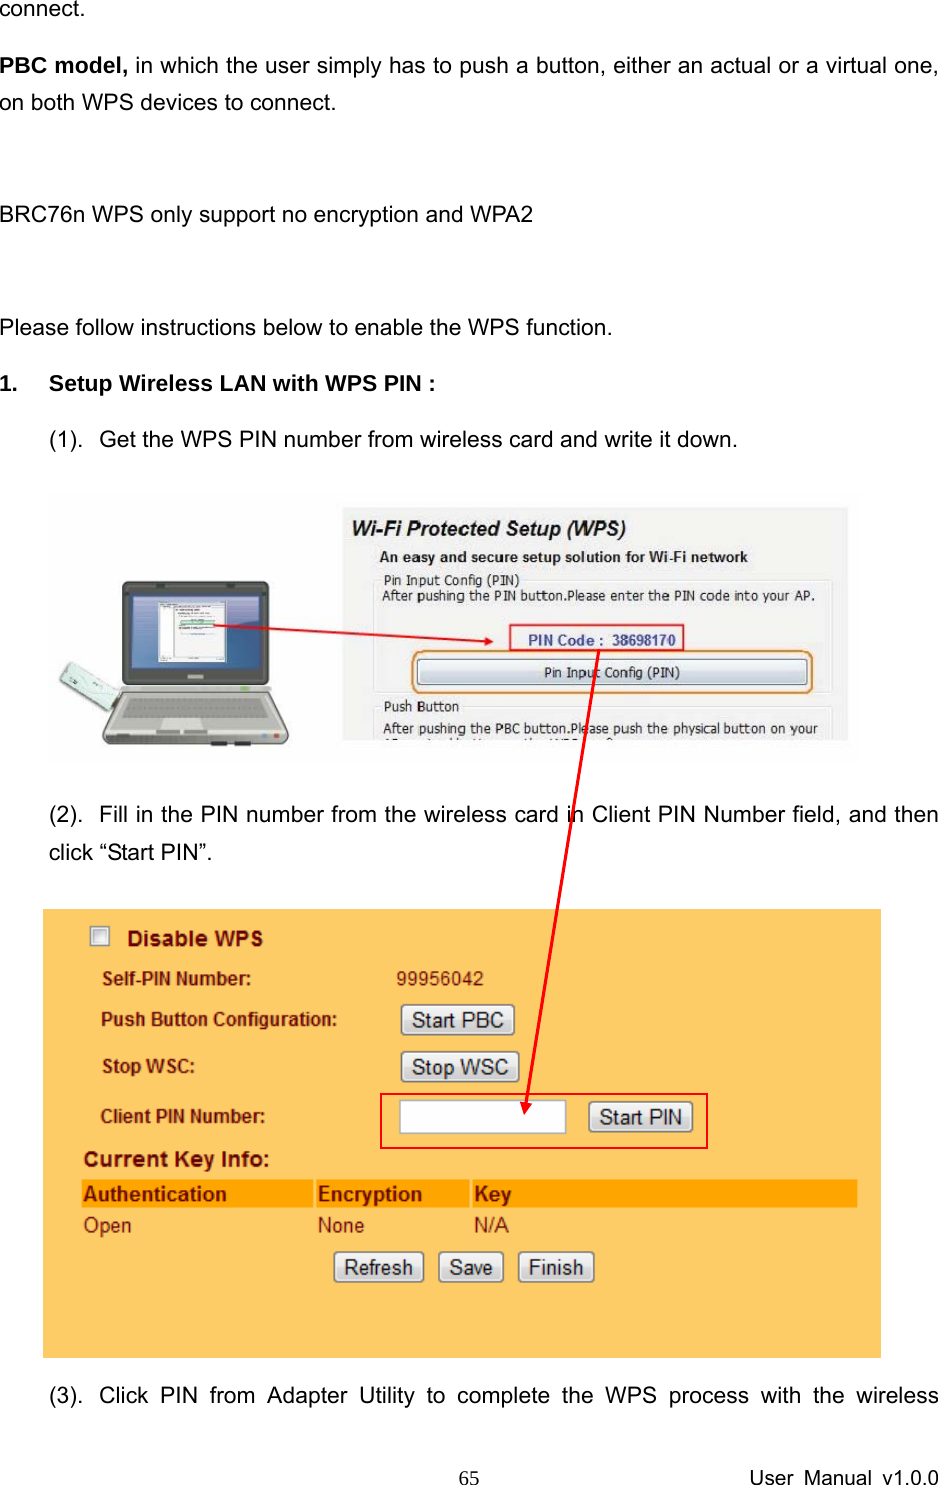                 User Manual v1.0.0 65connect.   PBC model, in which the user simply has to push a button, either an actual or a virtual one, on both WPS devices to connect.  BRC76n WPS only support no encryption and WPA2  Please follow instructions below to enable the WPS function.   1.  Setup Wireless LAN with WPS PIN :   (1).  Get the WPS PIN number from wireless card and write it down.    (2).  Fill in the PIN number from the wireless card in Client PIN Number field, and then click “Start PIN”.  (3).  Click PIN from Adapter Utility to complete the WPS process with the wireless 